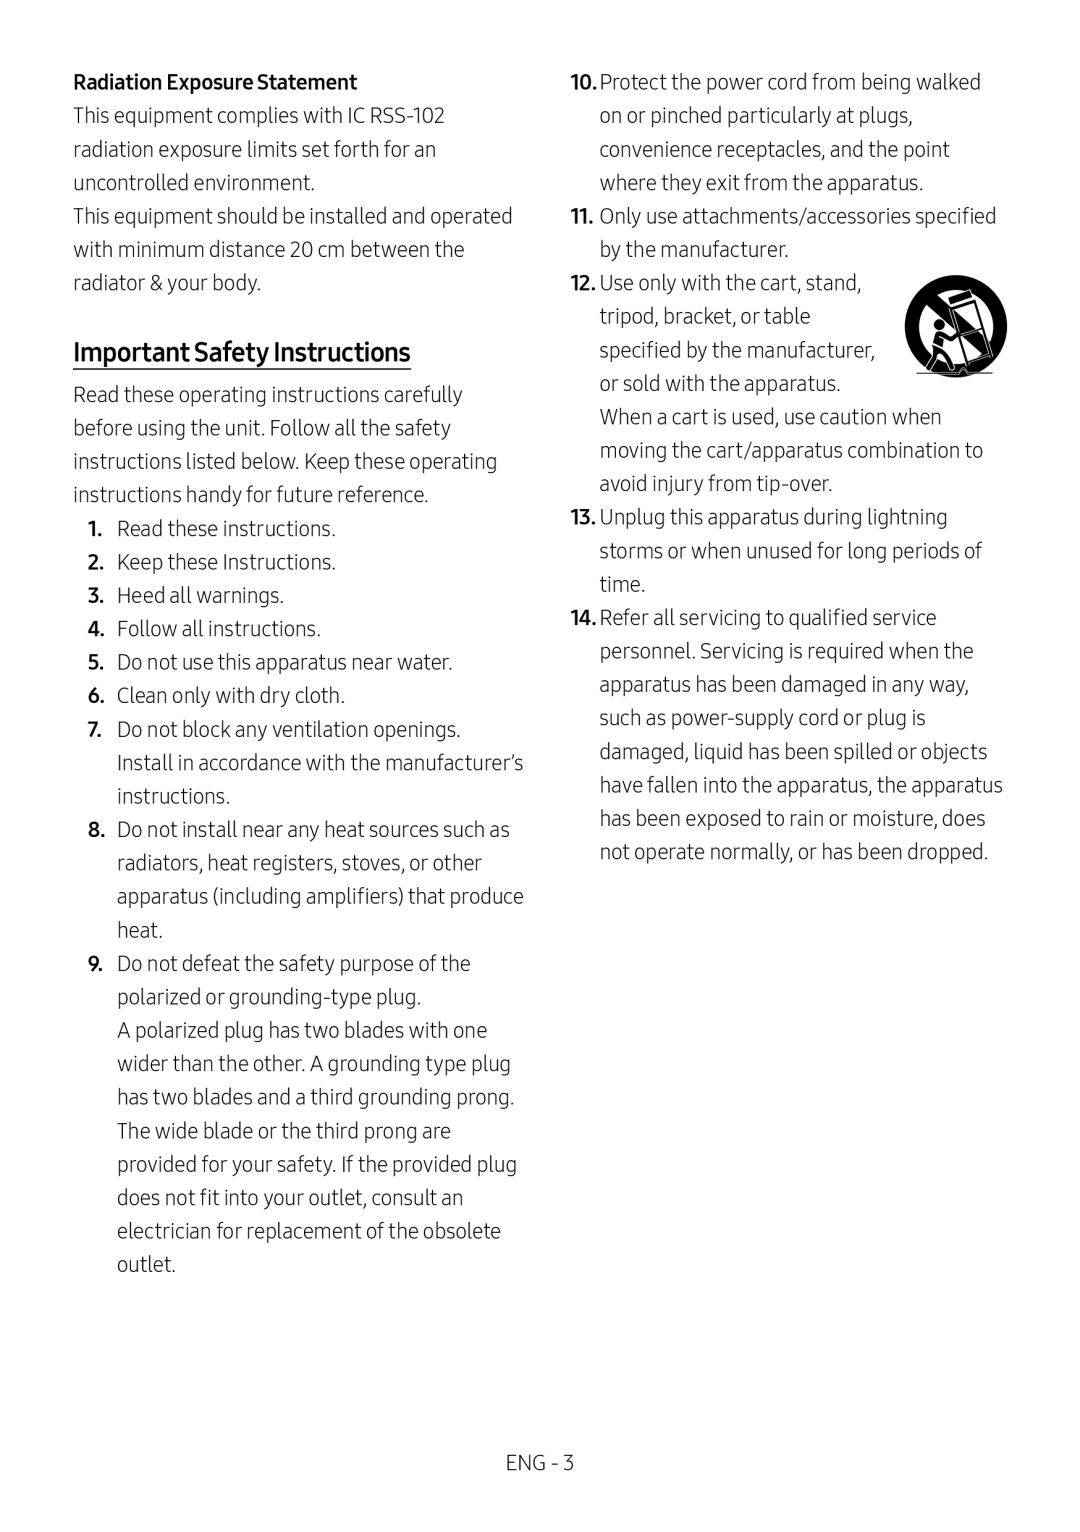 Important Safety Instructions Standard HW-NW700